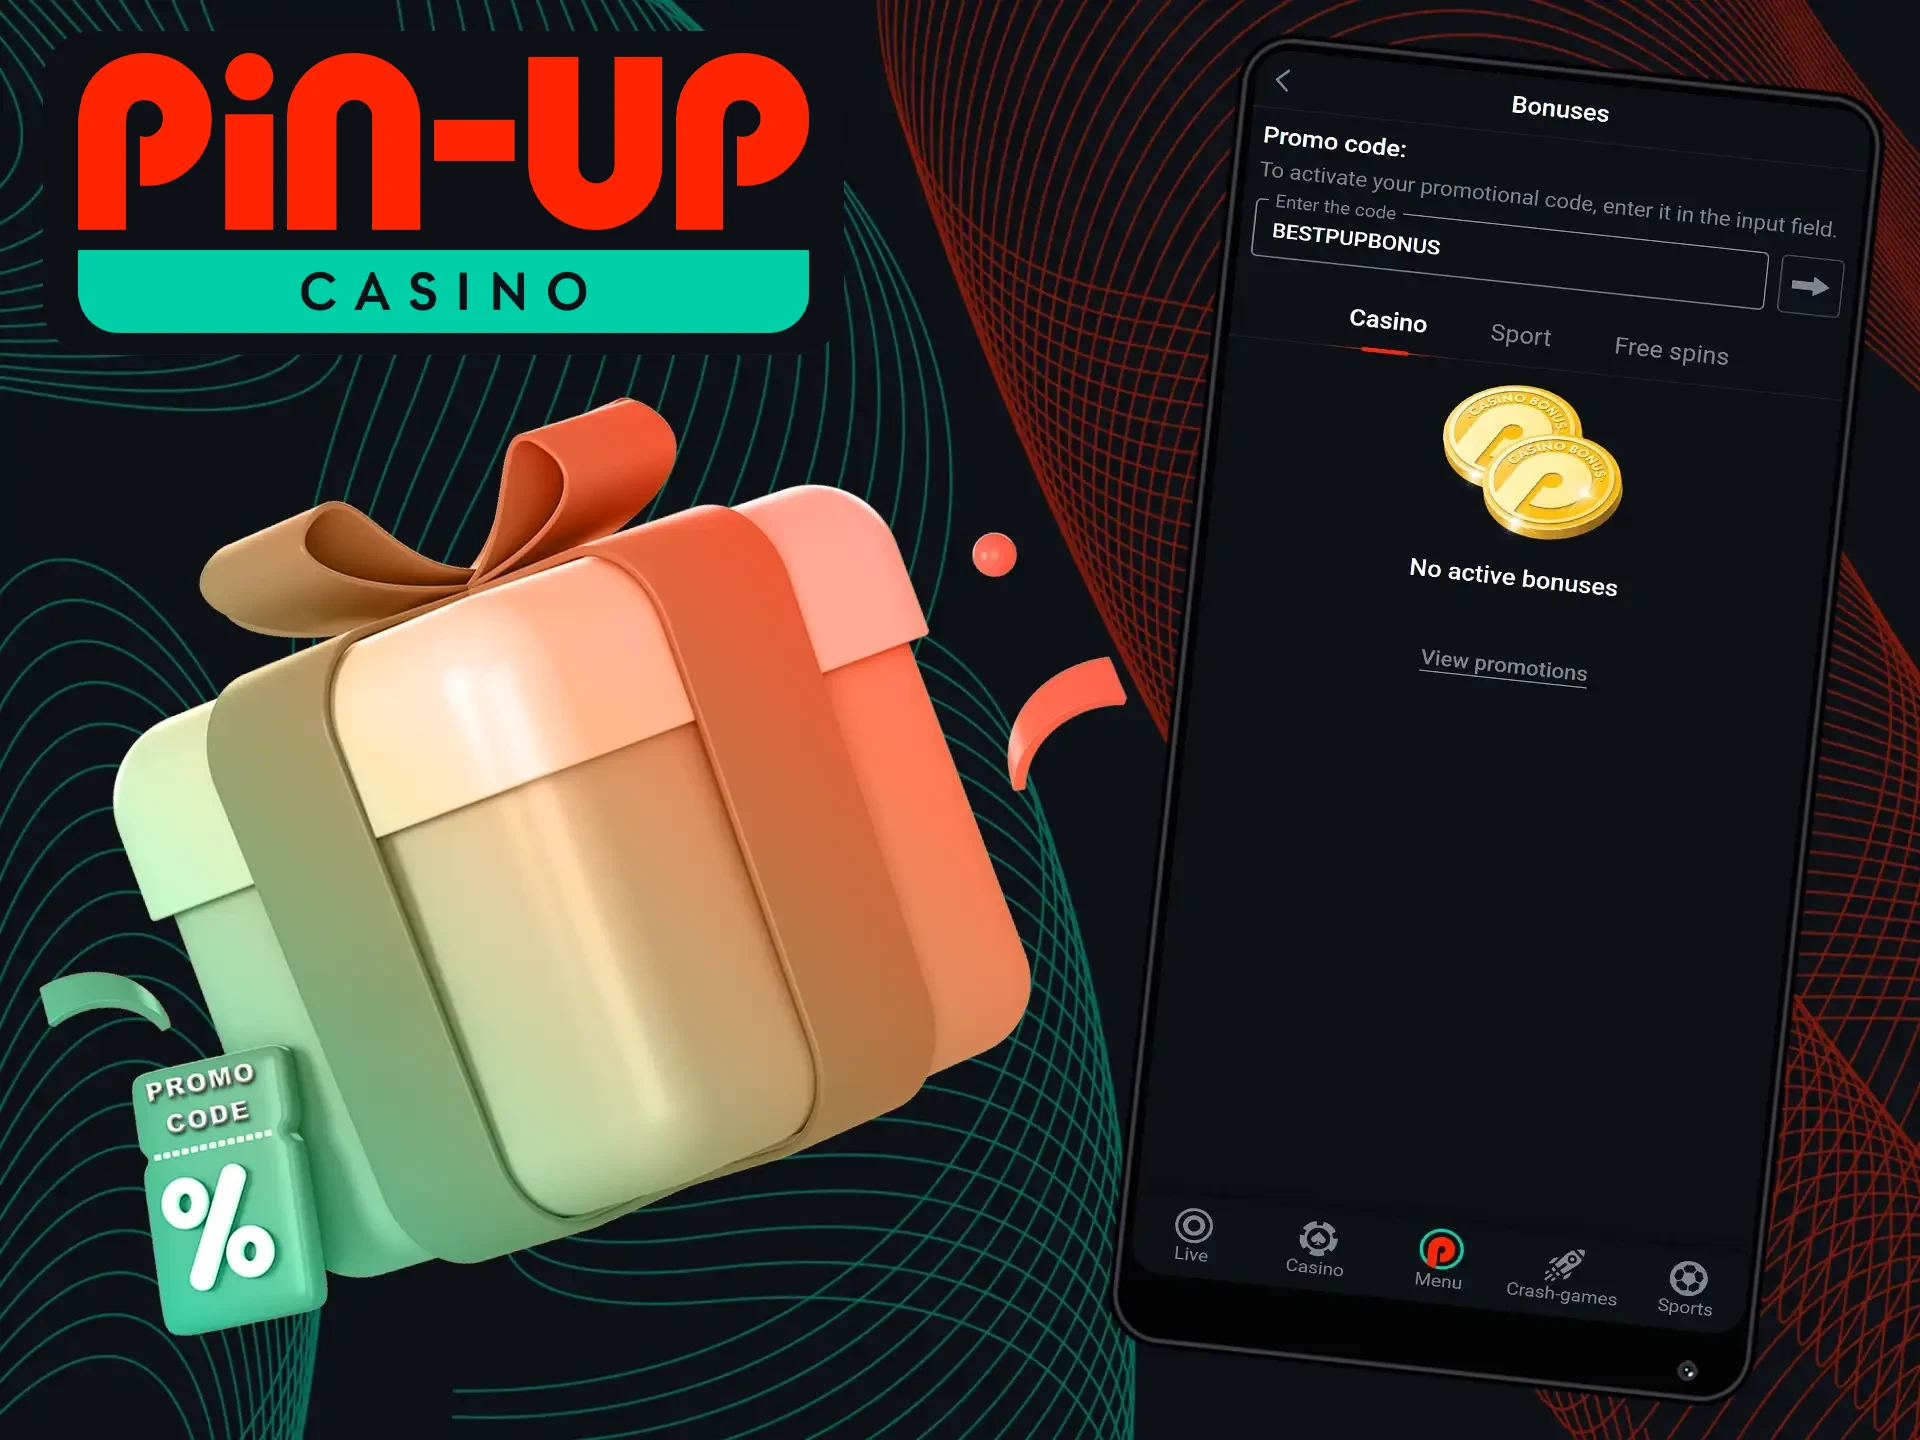 Take advantage of a boosted welcome offer at Pin-Up Casino with a promo code.